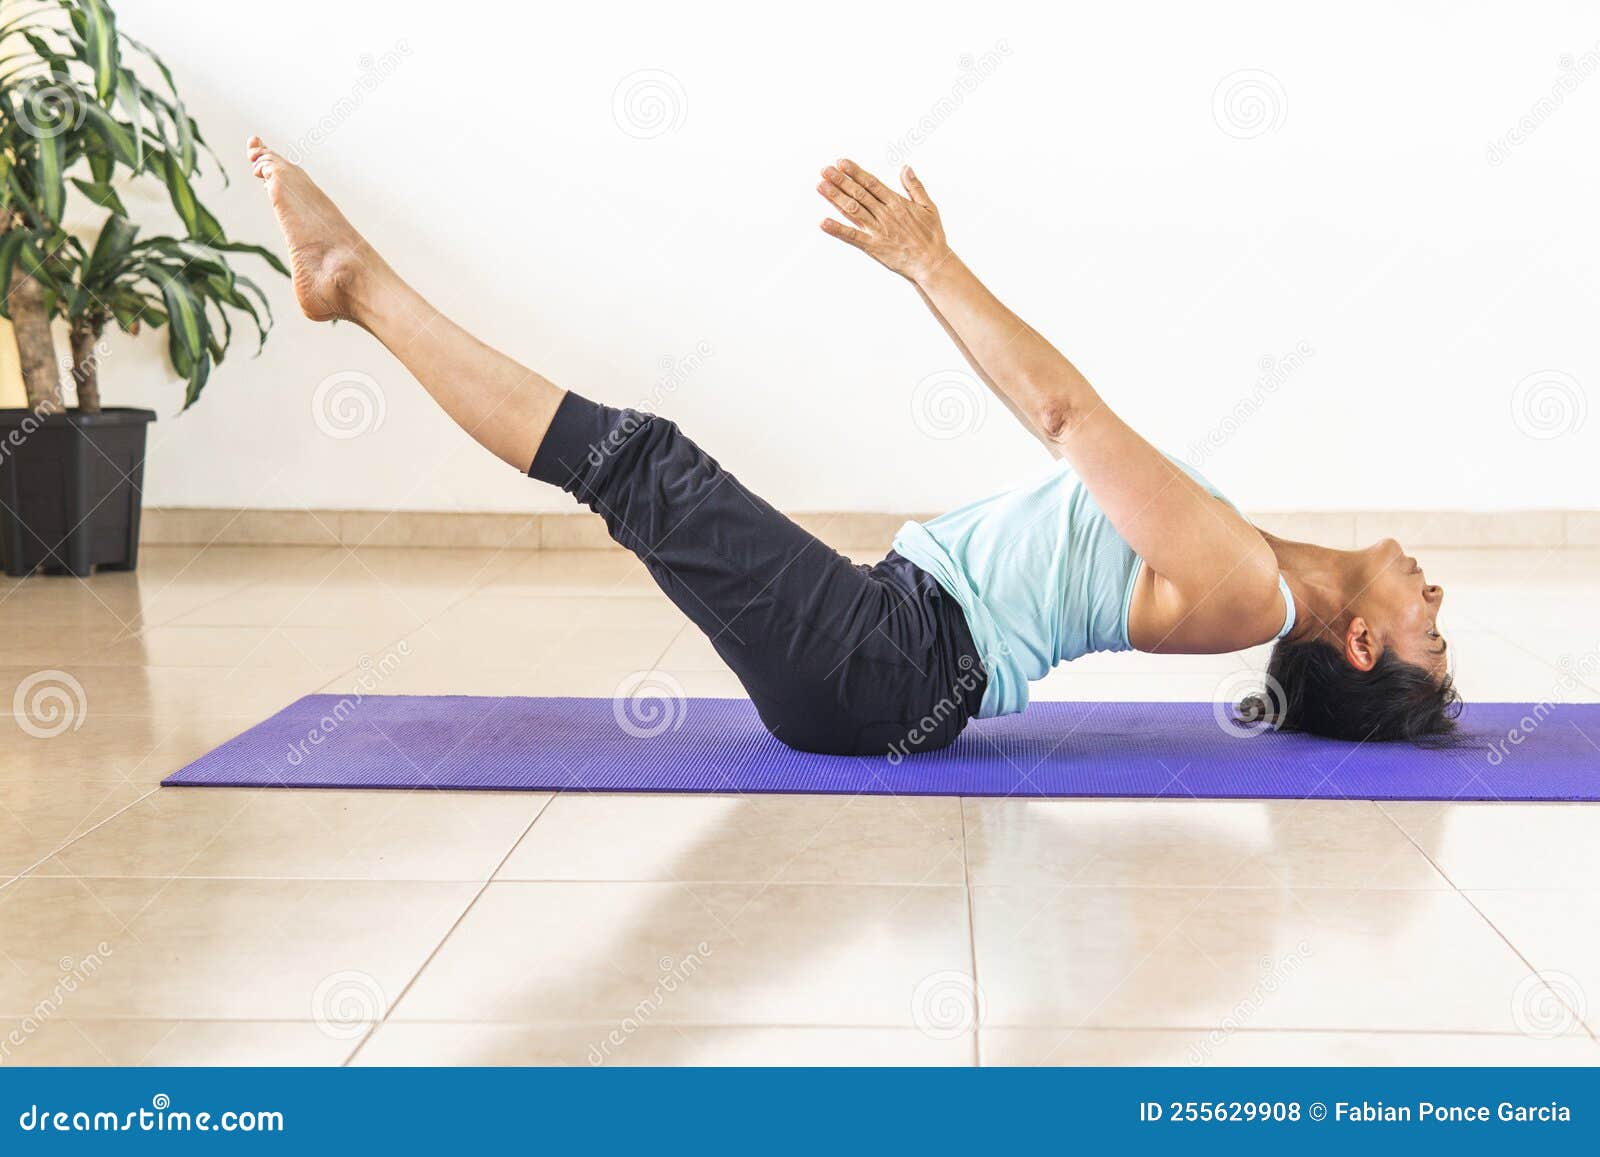 5 Essential Yoga Poses For Stress Relief | Credihealth